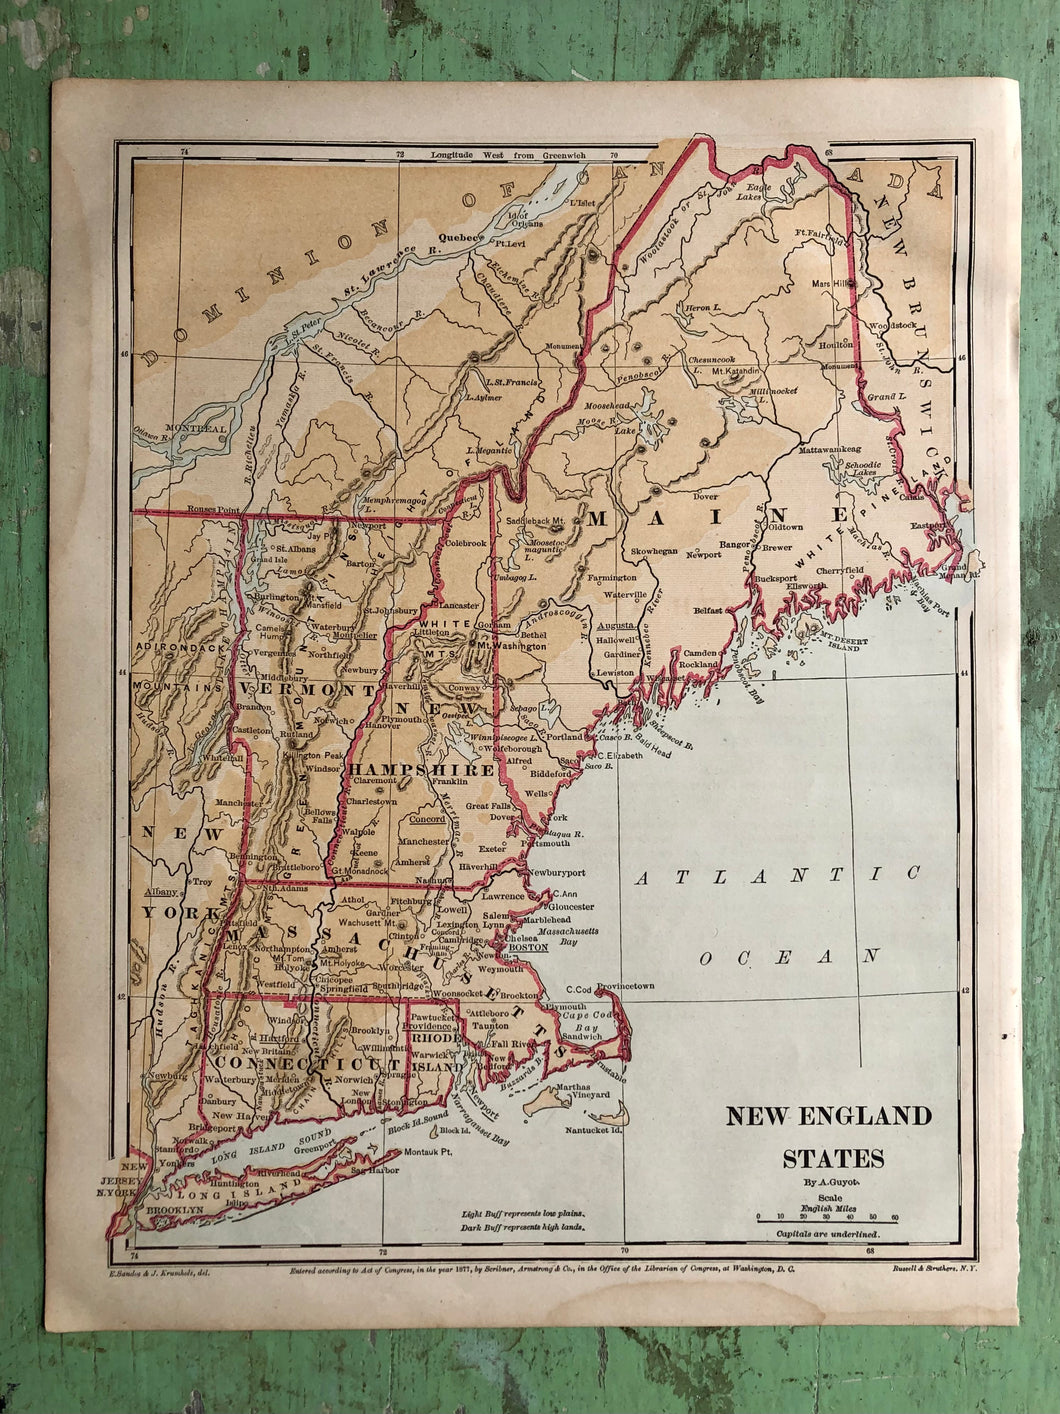 Map of New England States from Guyot's New Intermediate Geography